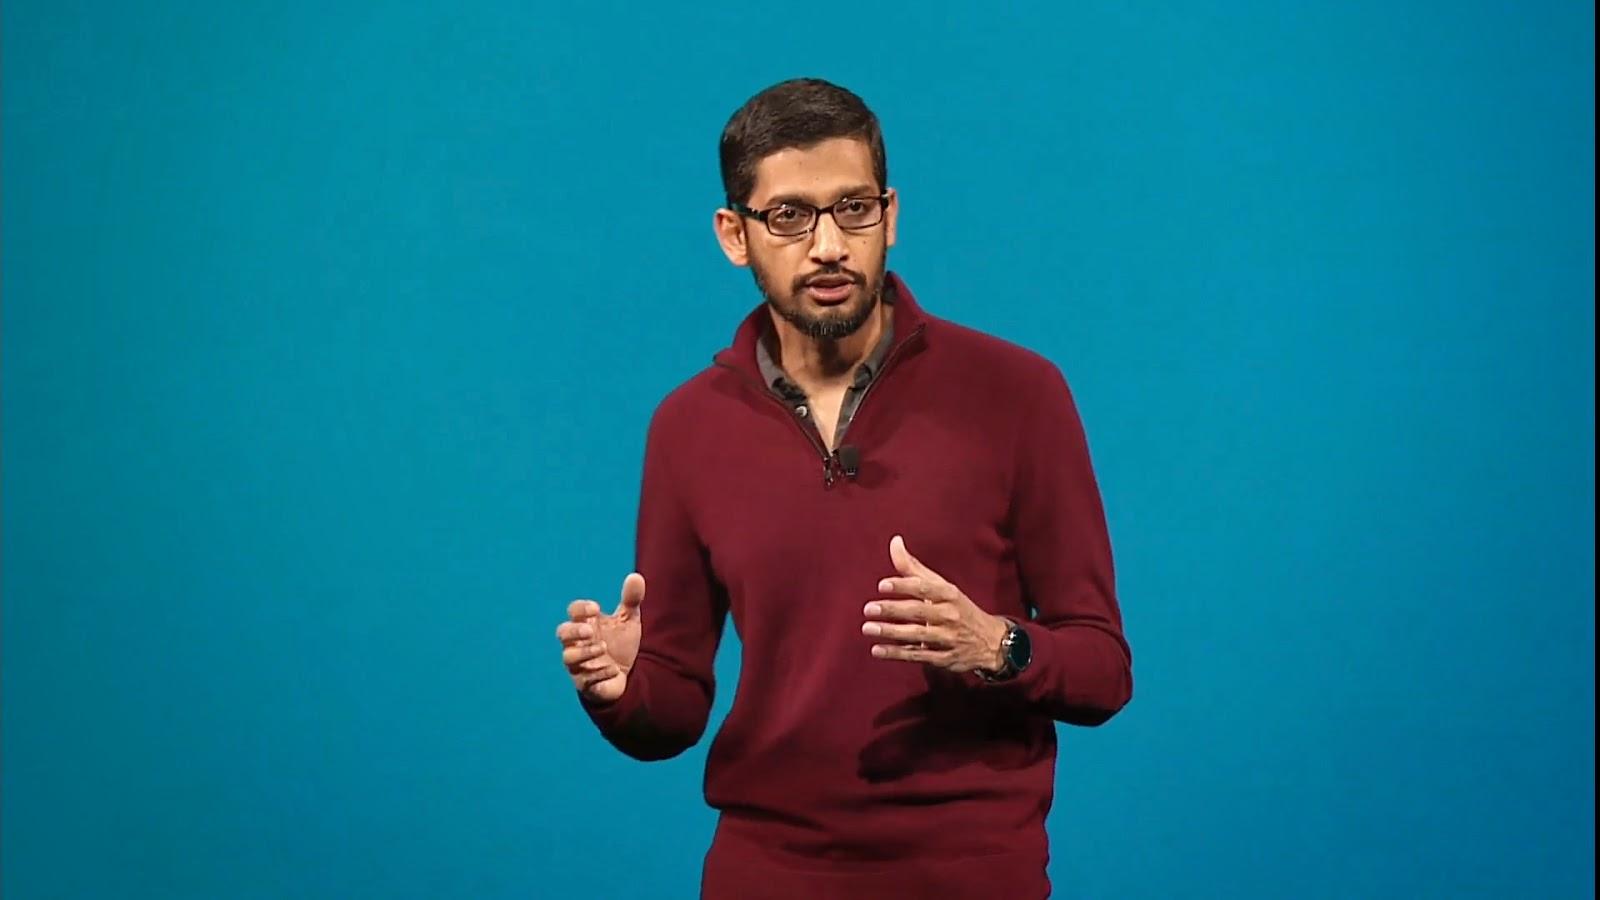 All about Sundar Pichai's New Responsibilities at Google